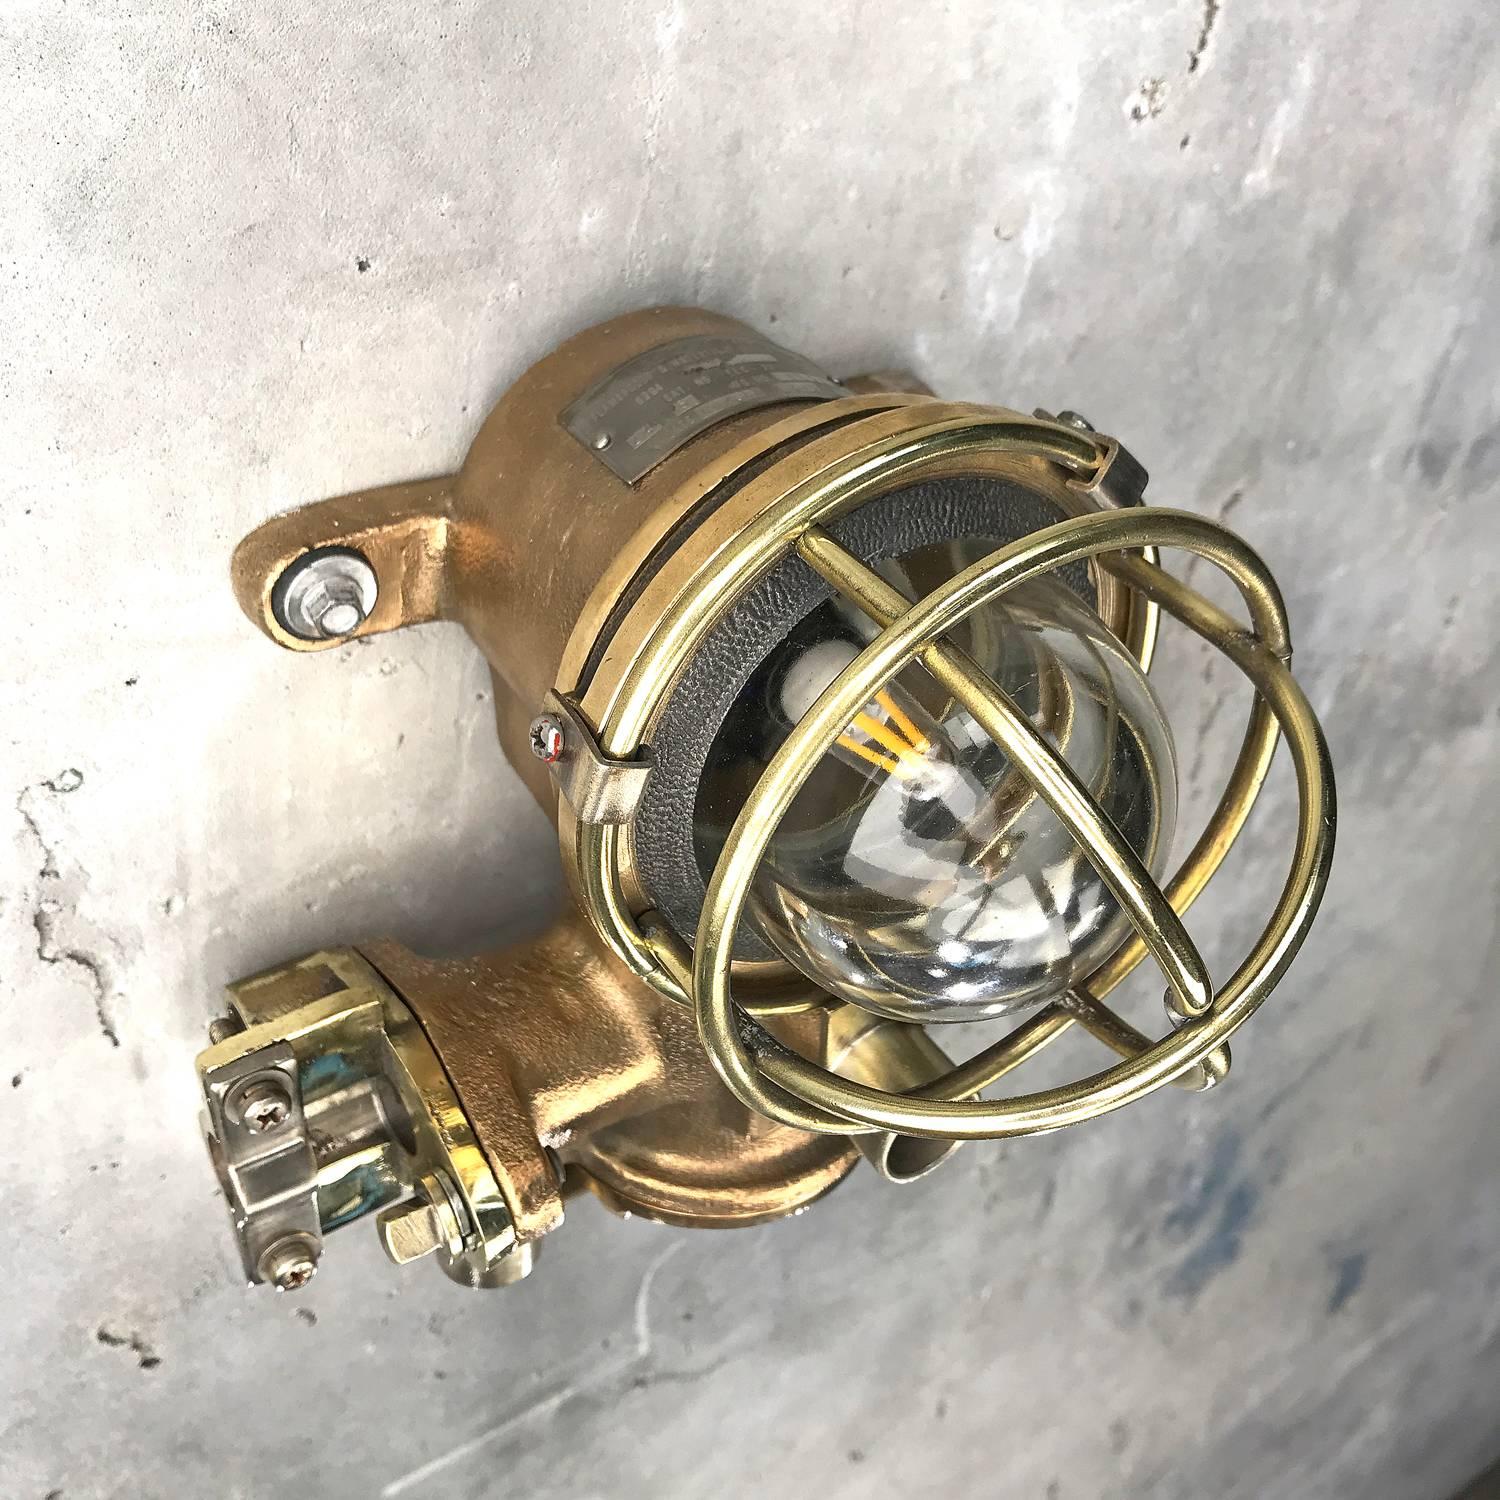 1980s Cast Bronze Flame Proof Water Tight Wall Light, Glass Dome Brass Cage E12 11